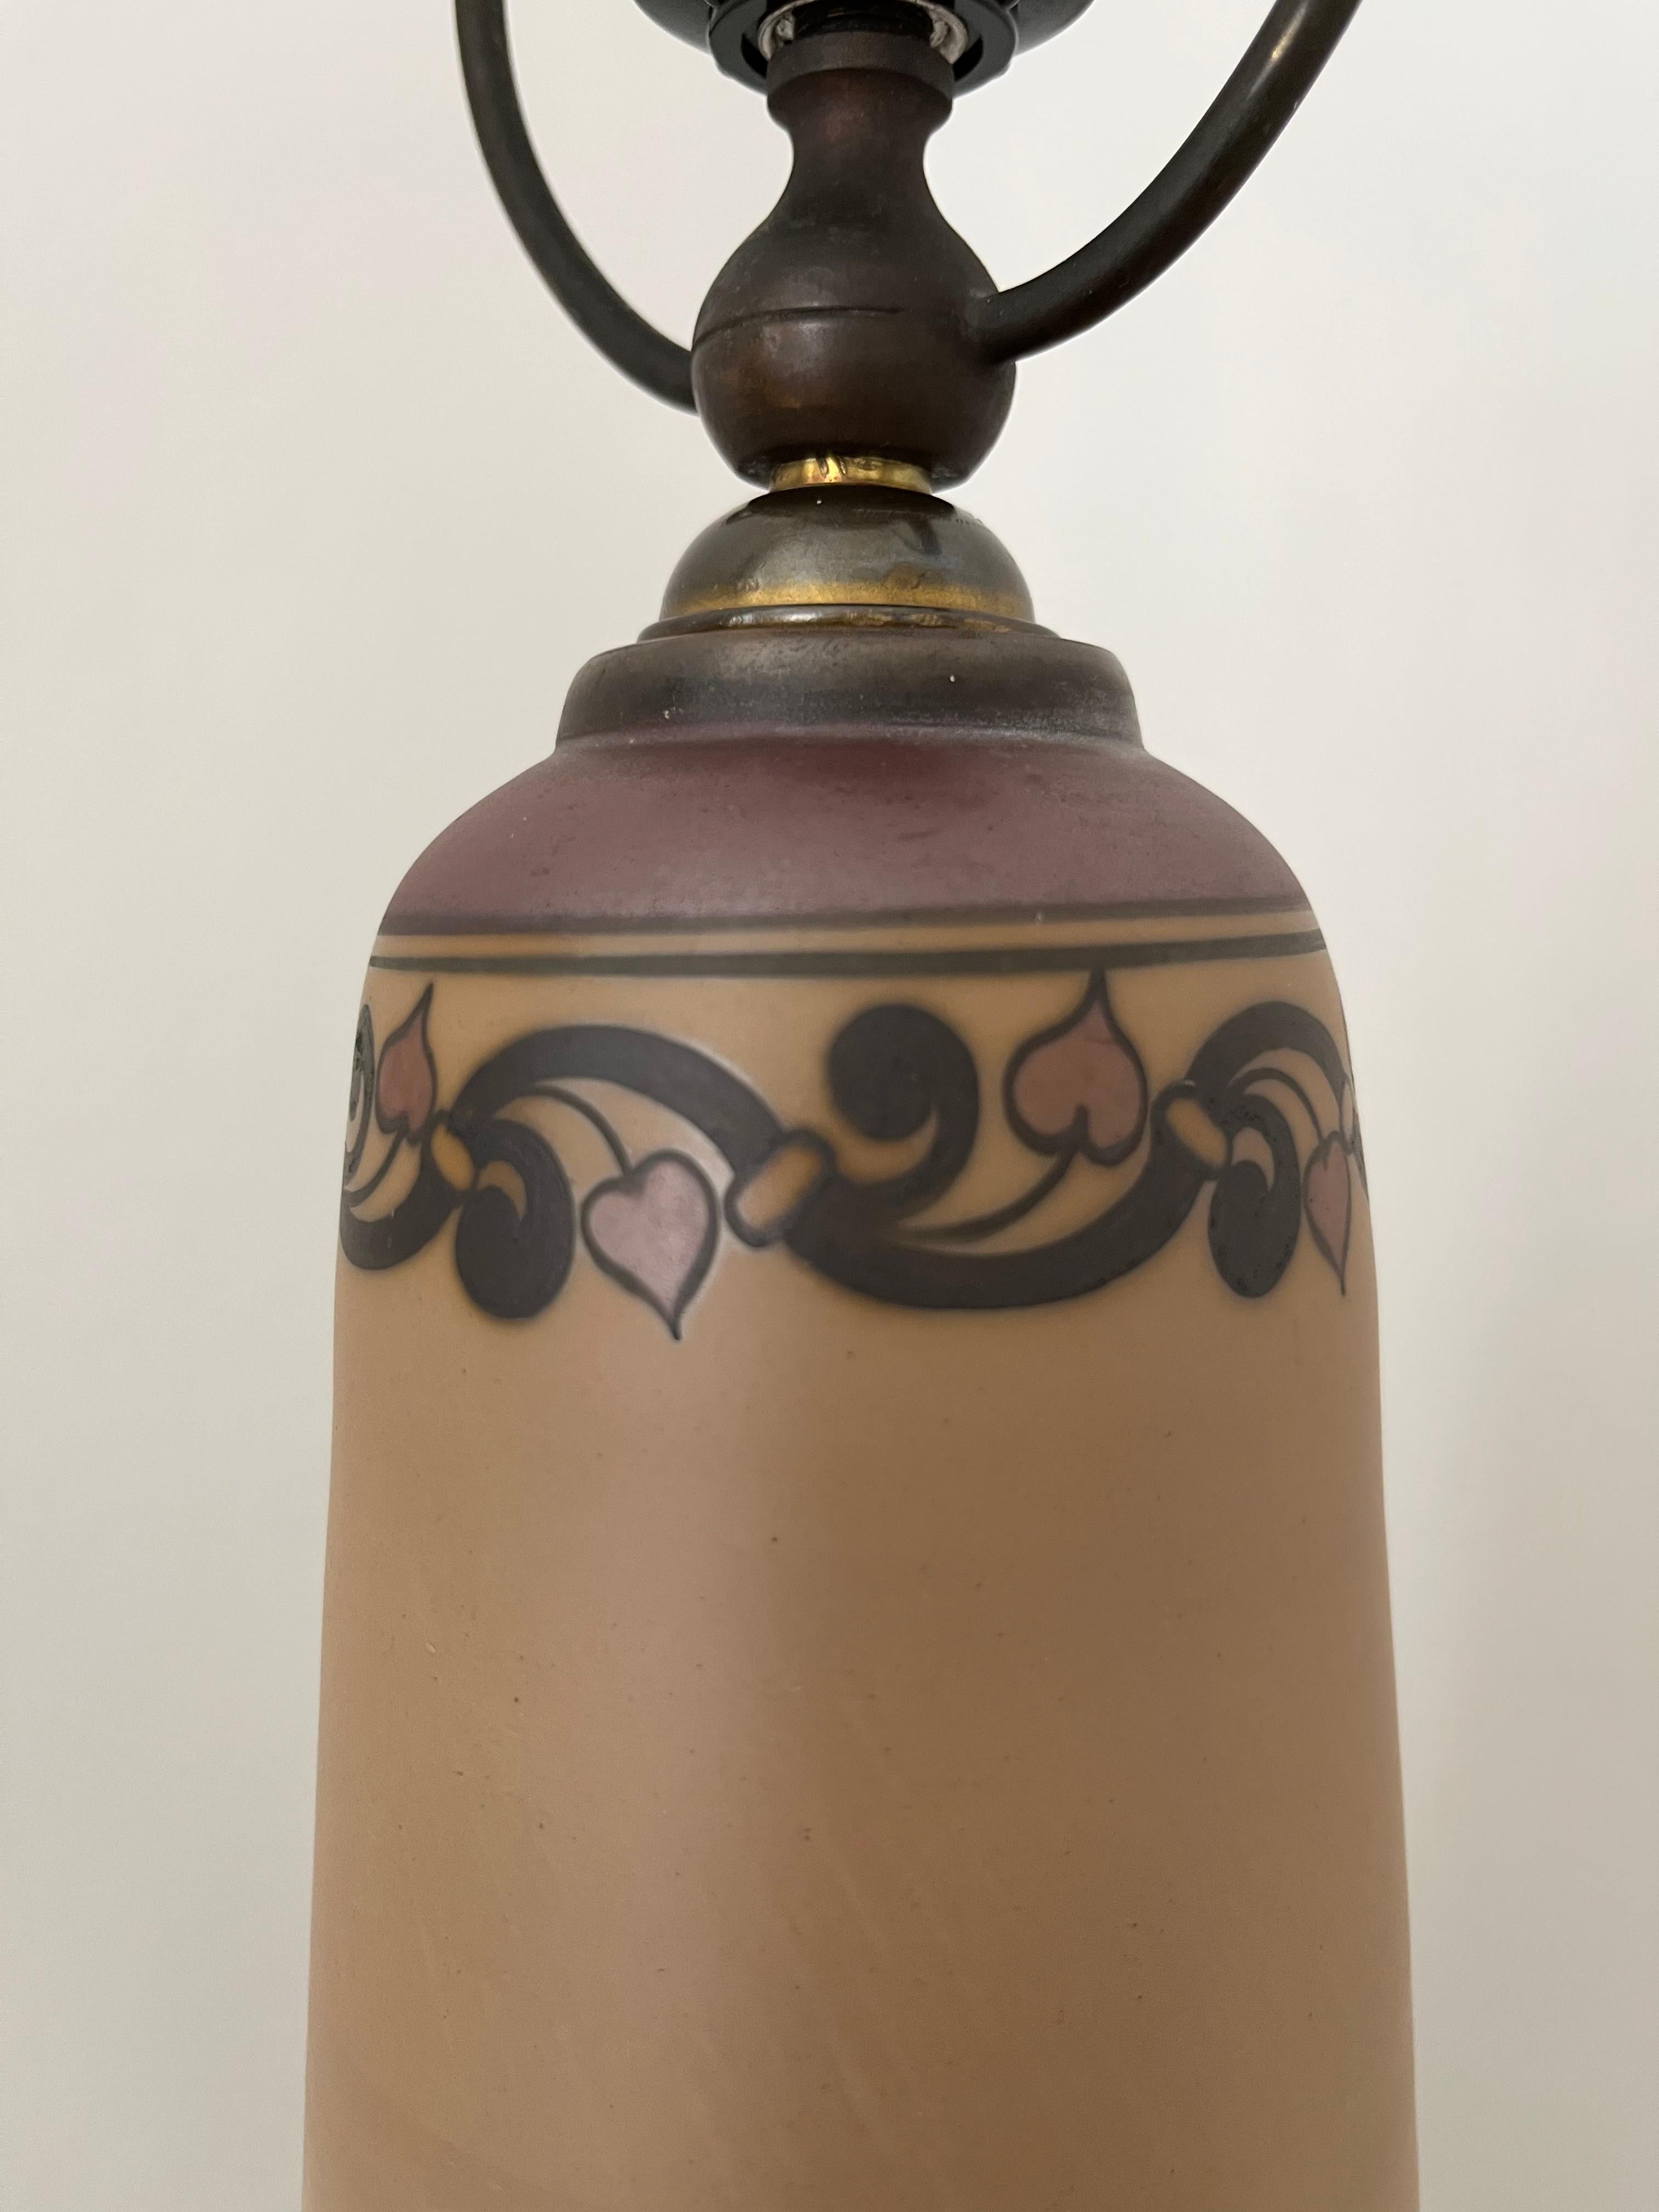 1930s Danish art nouveau ceramic hand decorated table lamp by L. Hjort In Good Condition For Sale In Frederiksberg C, DK